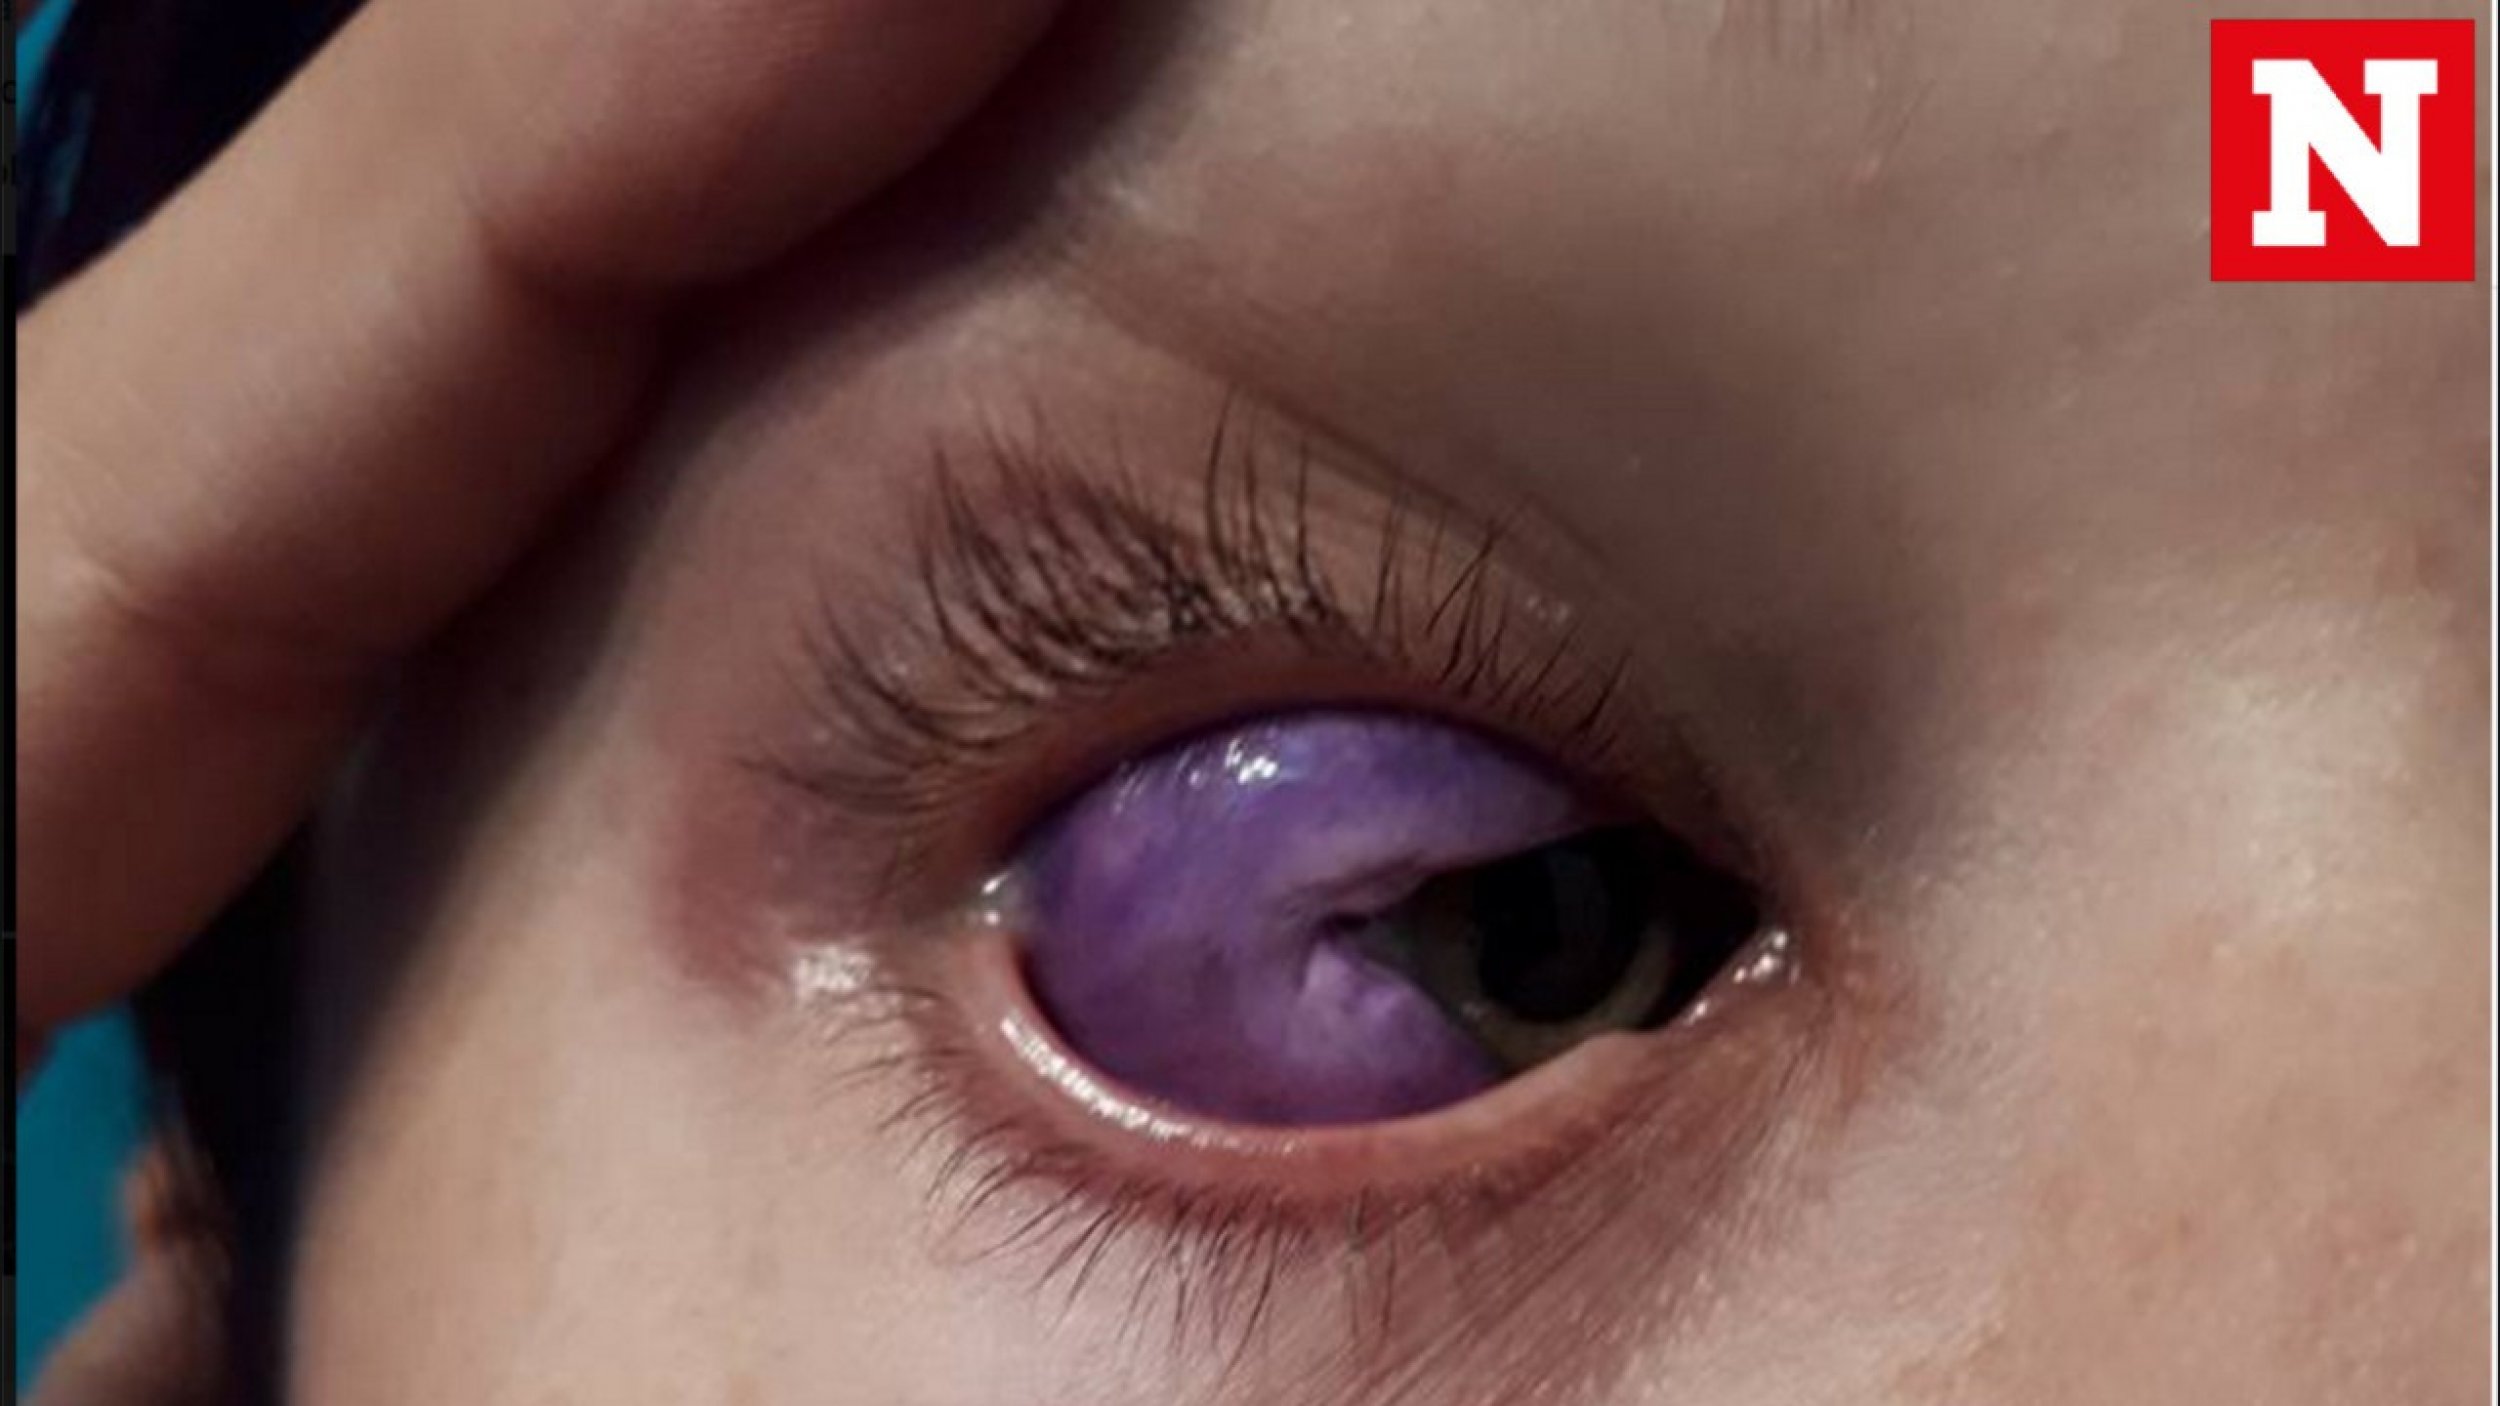 A woman is going blind after copying an Australian model's eyeball tattoos